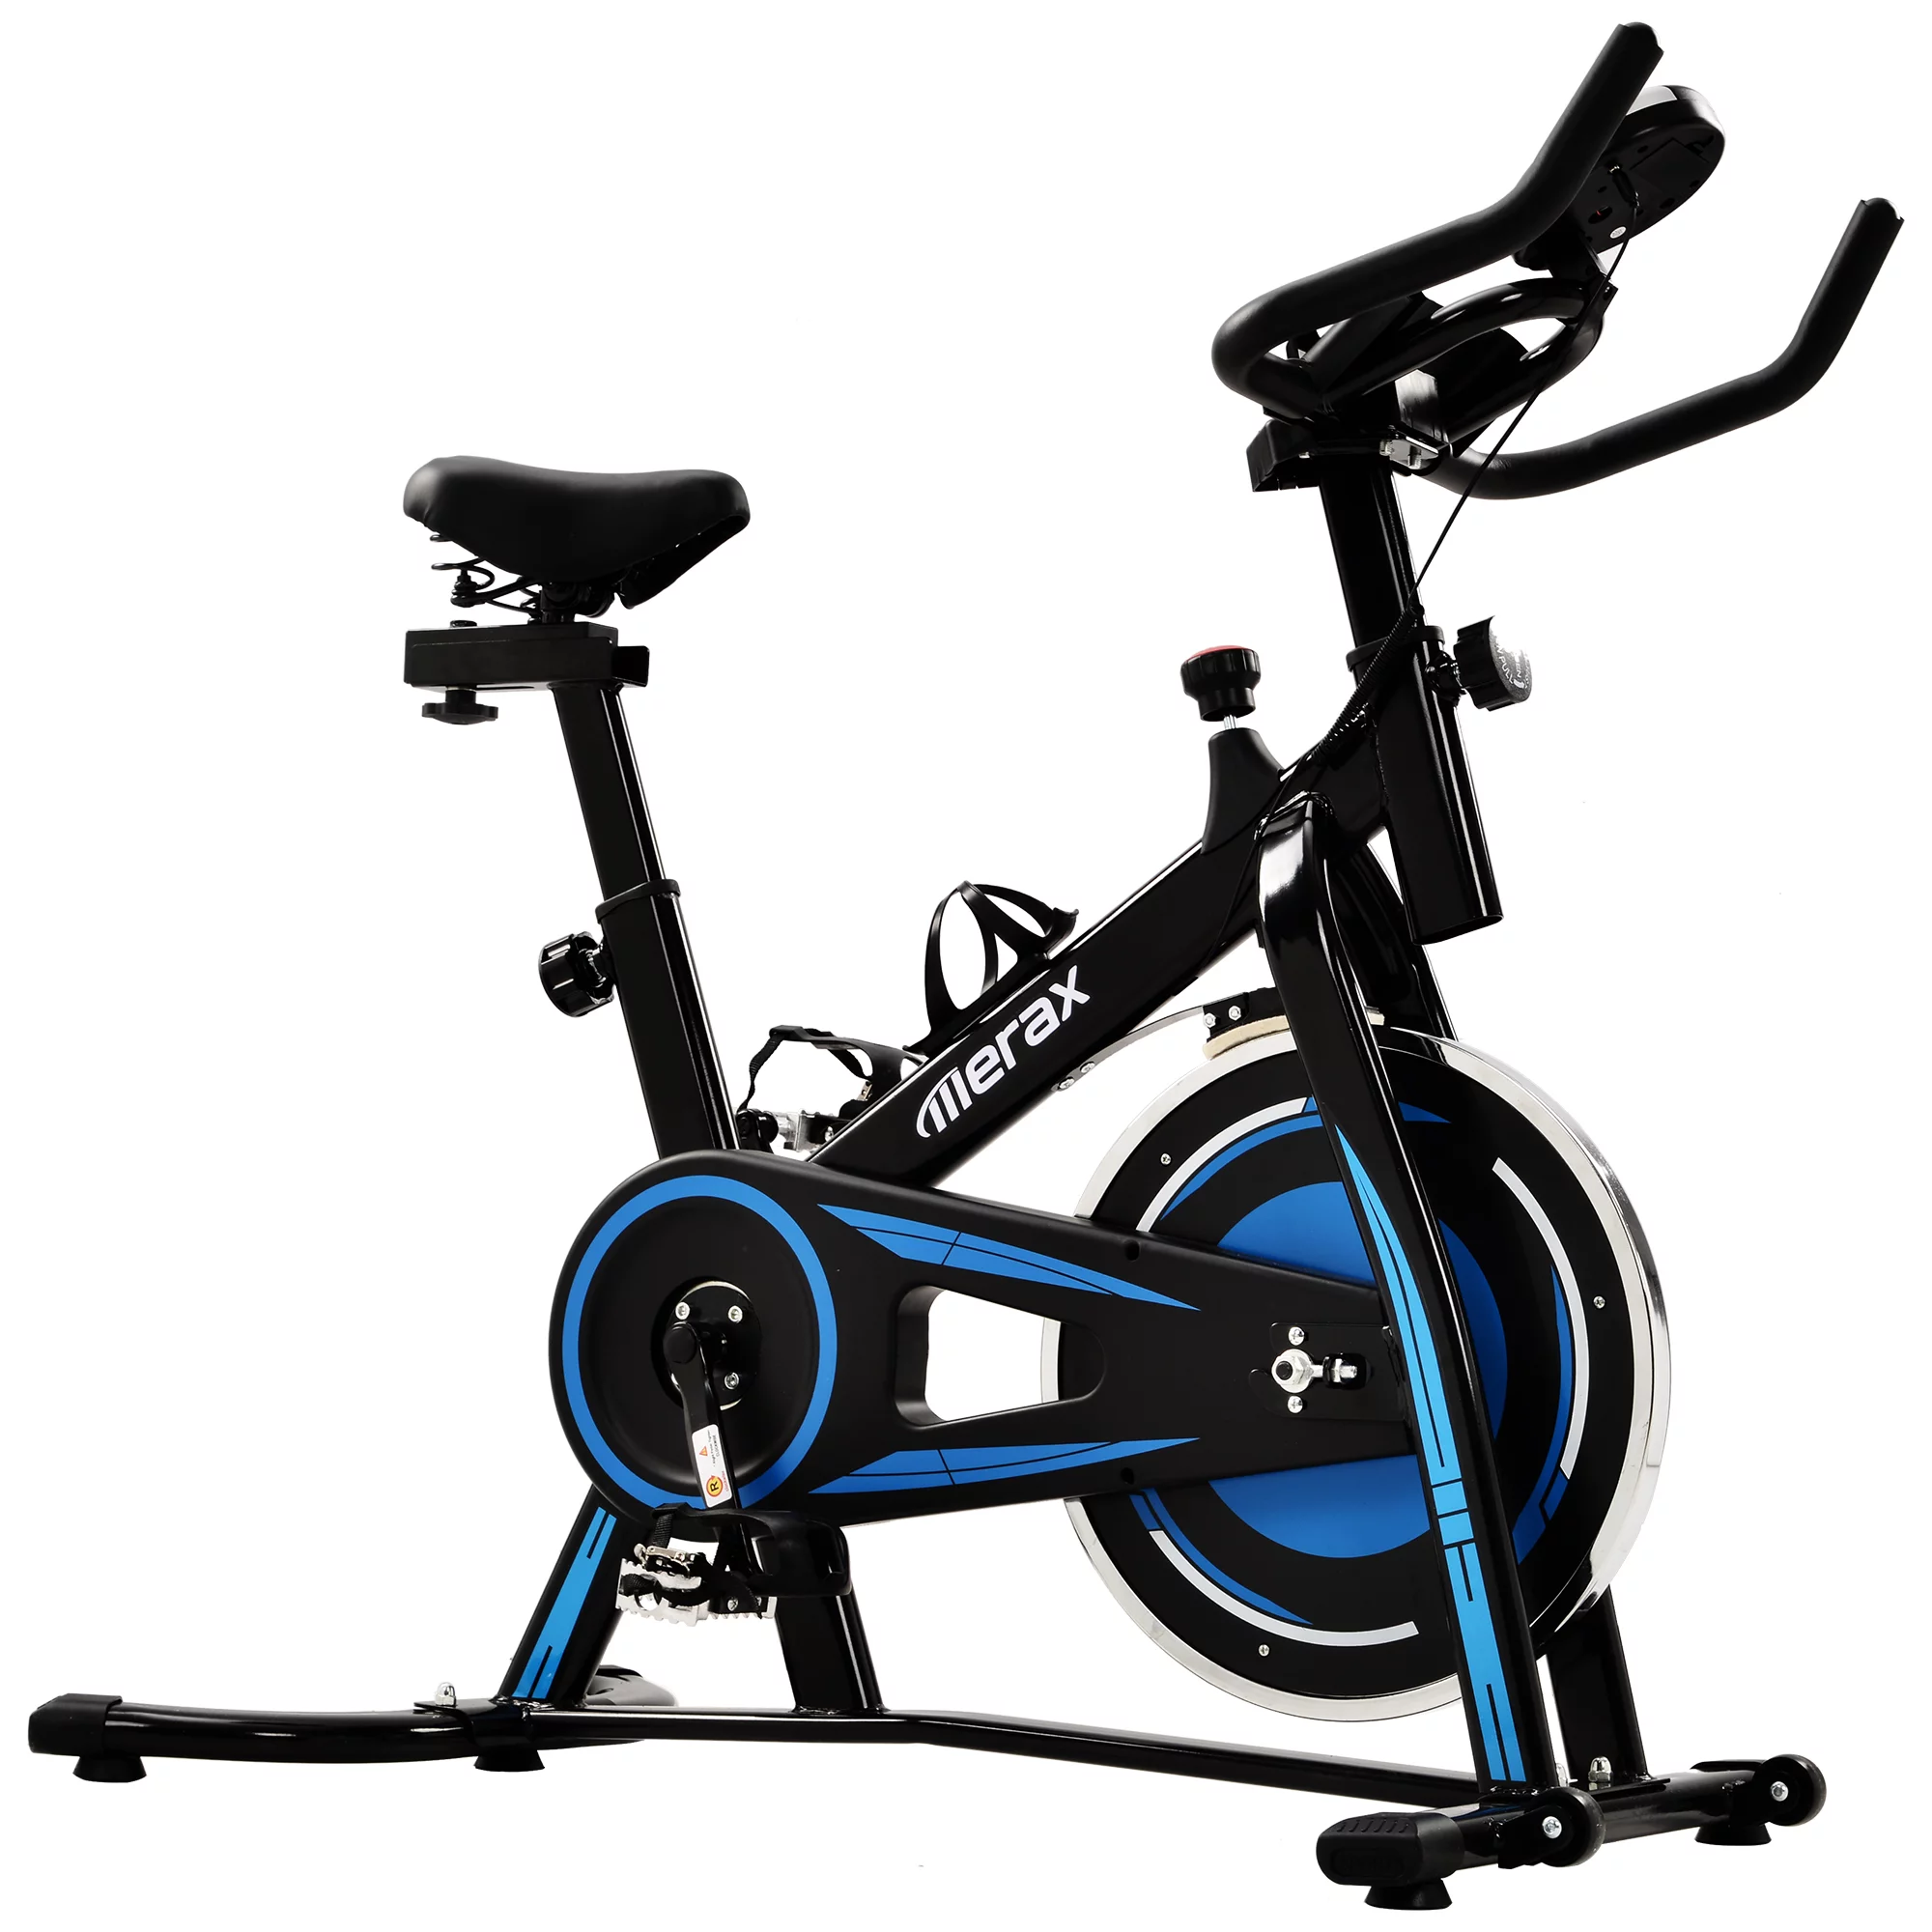 Review of the Merax Exercise Bike